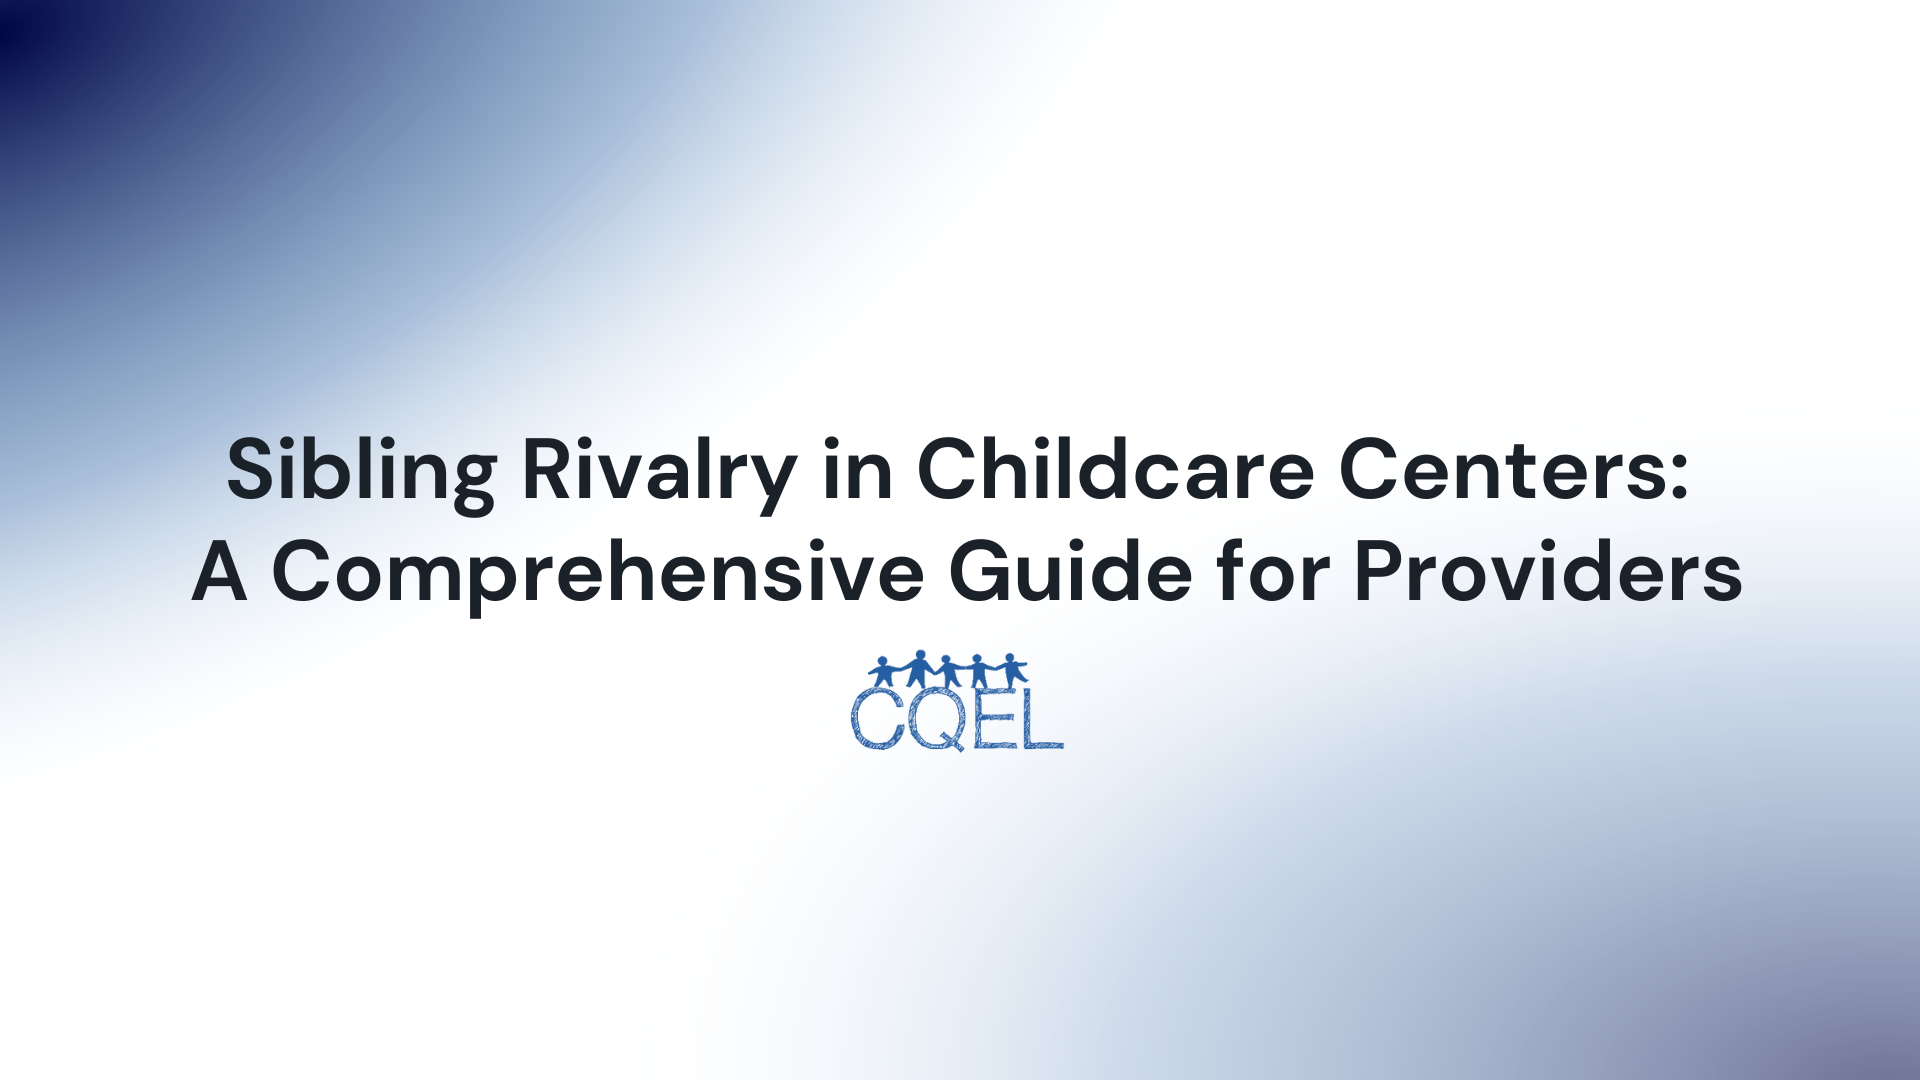 Sibling Rivalry in Childcare Centers: A Comprehensive Guide for Providers